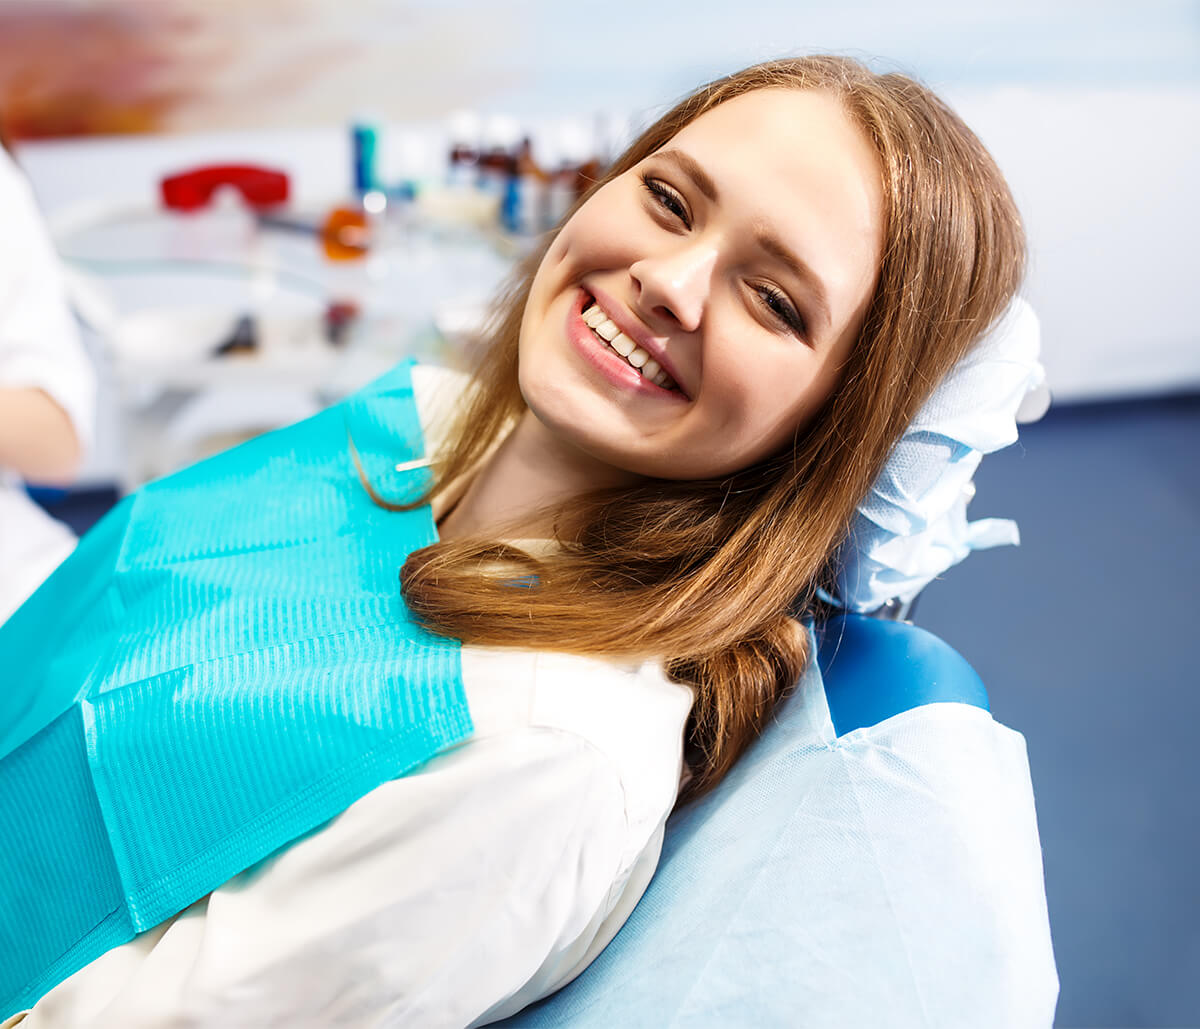 Painless Wisdom Tooth Extraction in Houston TX Area